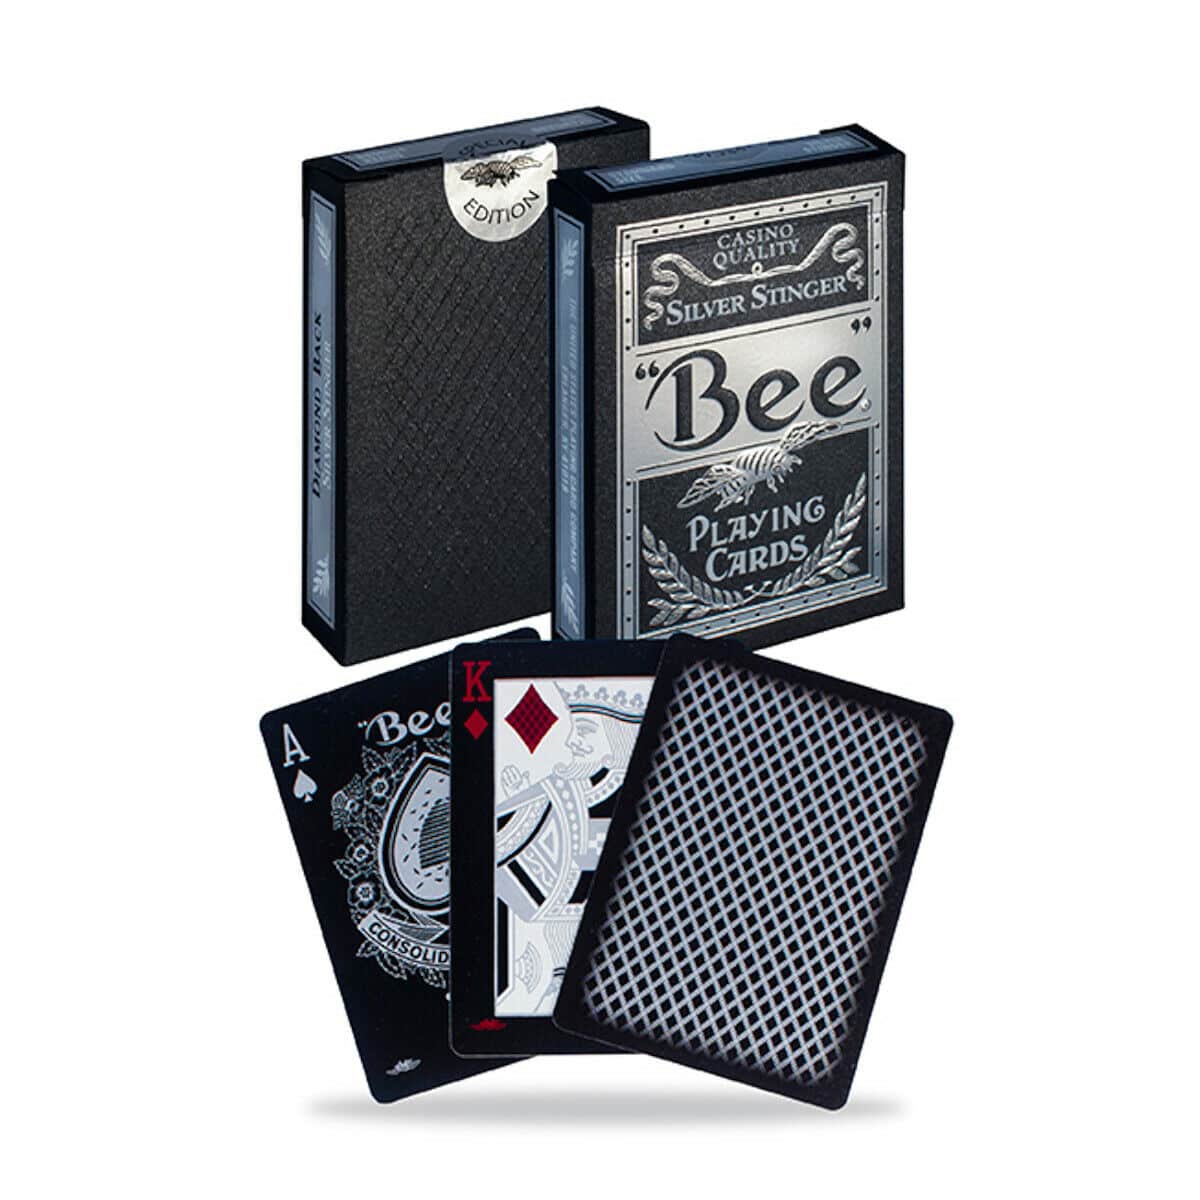 Bee Silver Stinger 10228